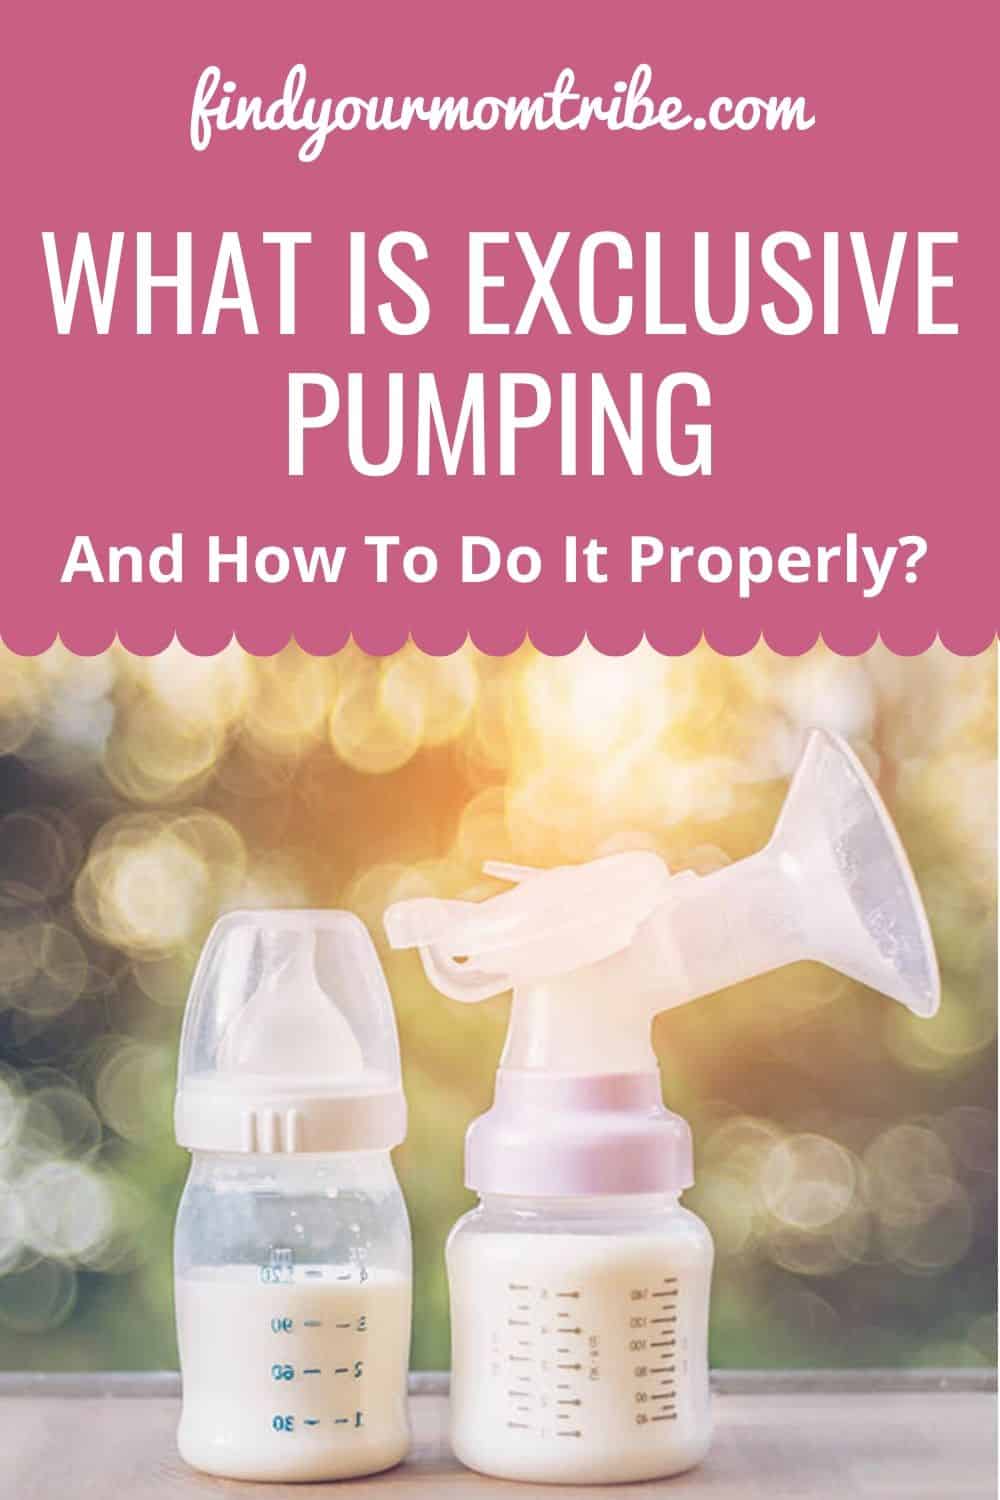 What Is Exclusive Pumping